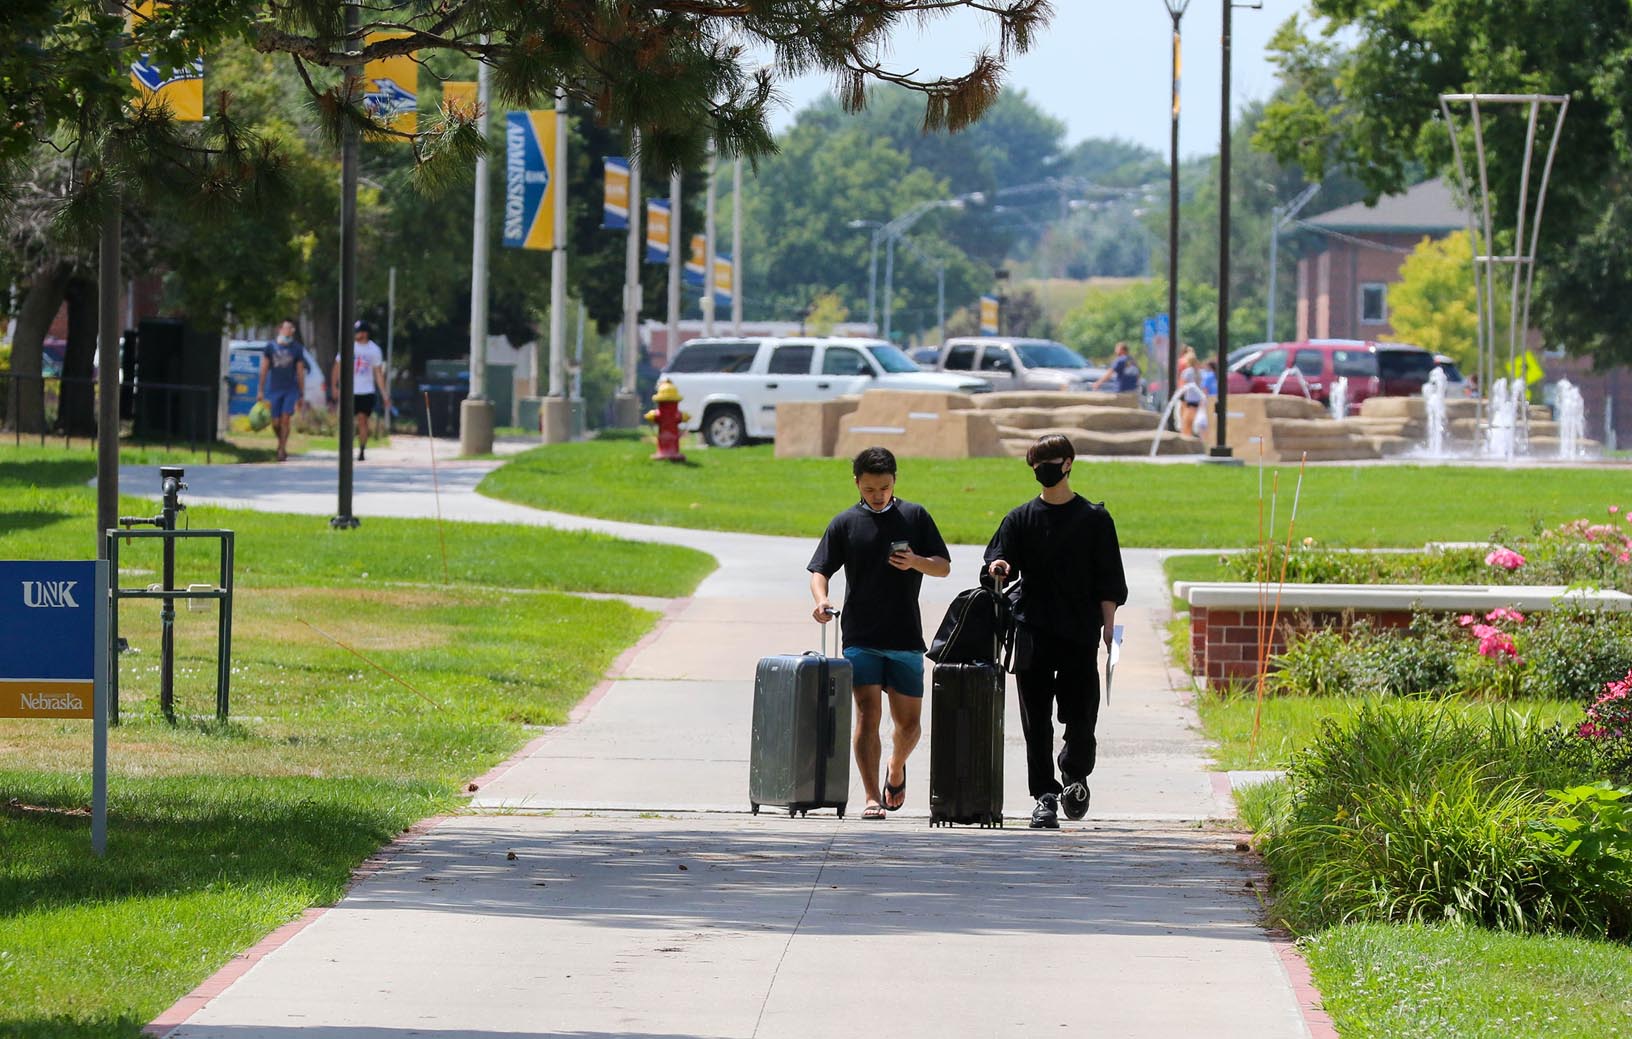 More than 1,400 students are expected to live in UNK residence halls this semester. Most of them will move in this week.